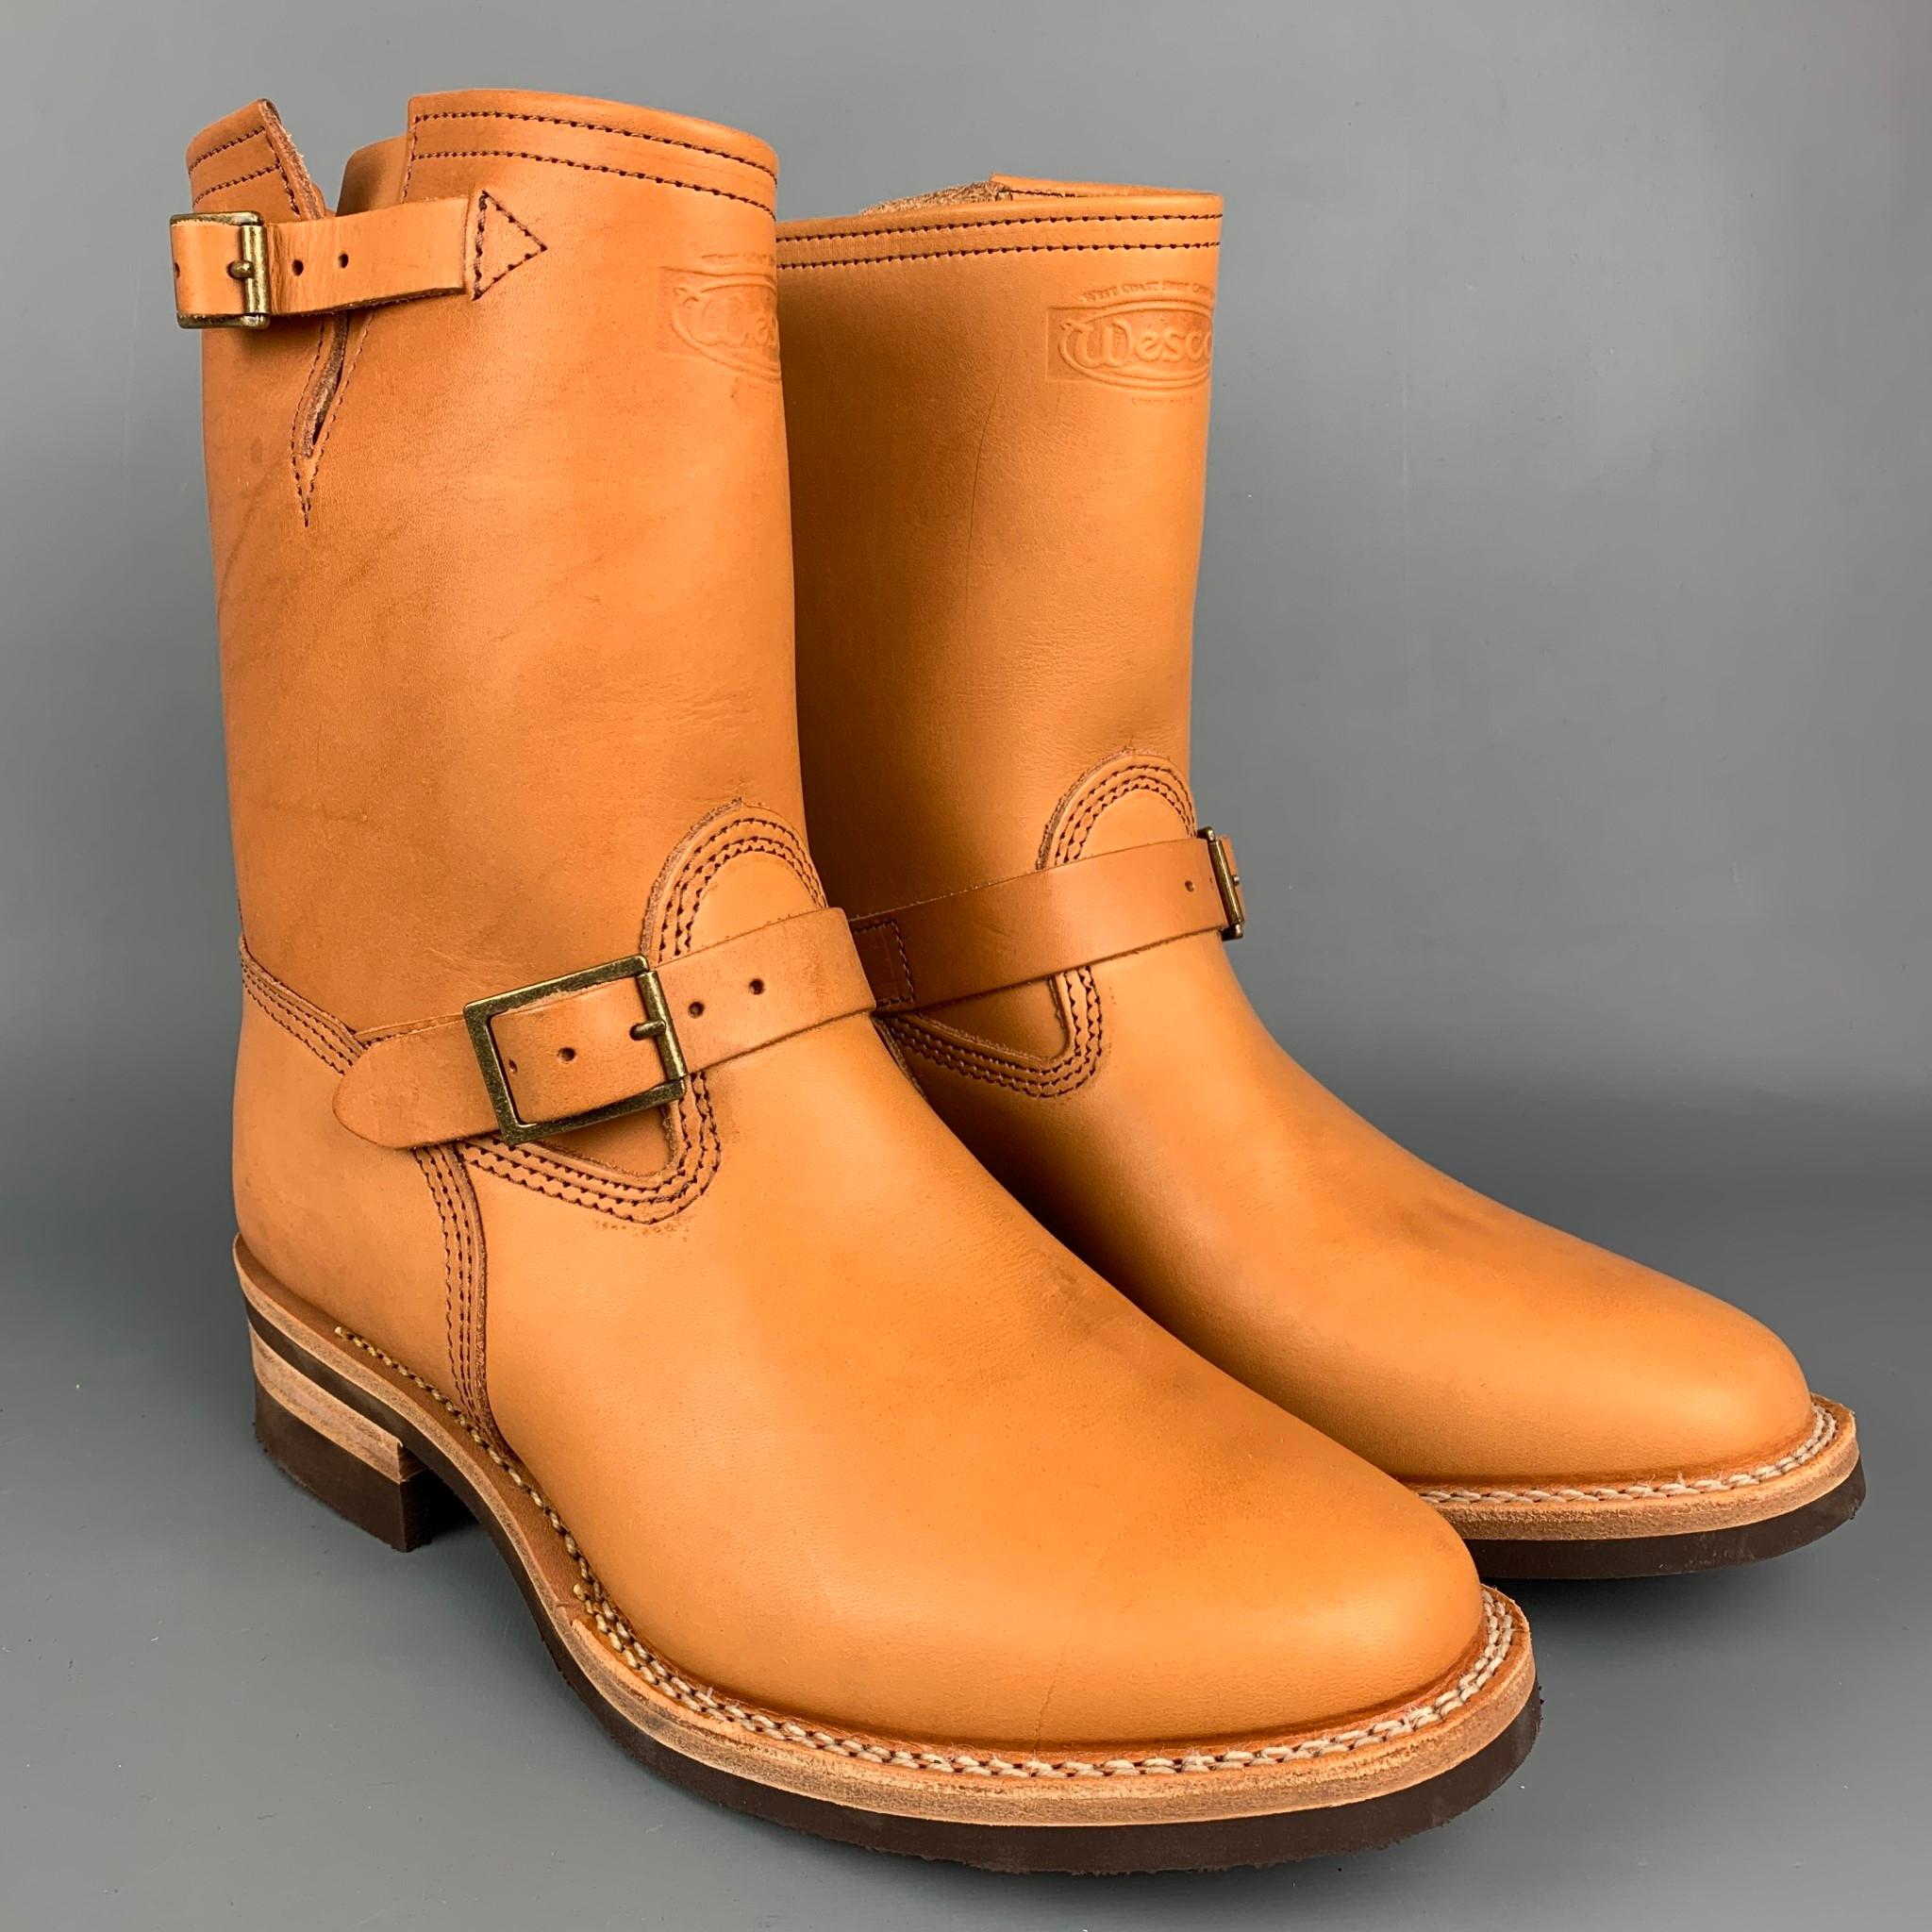 WESCO boots comes in a tan leather featuring a motorcycle style, pull on, cap toe, top stitching, and brass buckles. 

Excellent Pre-Owned Condition.
Marked: 11.5 E 11 17

Measurements:

Length: 12.5 in.
Width: 4.5 in.
Height: 10.5 in. 